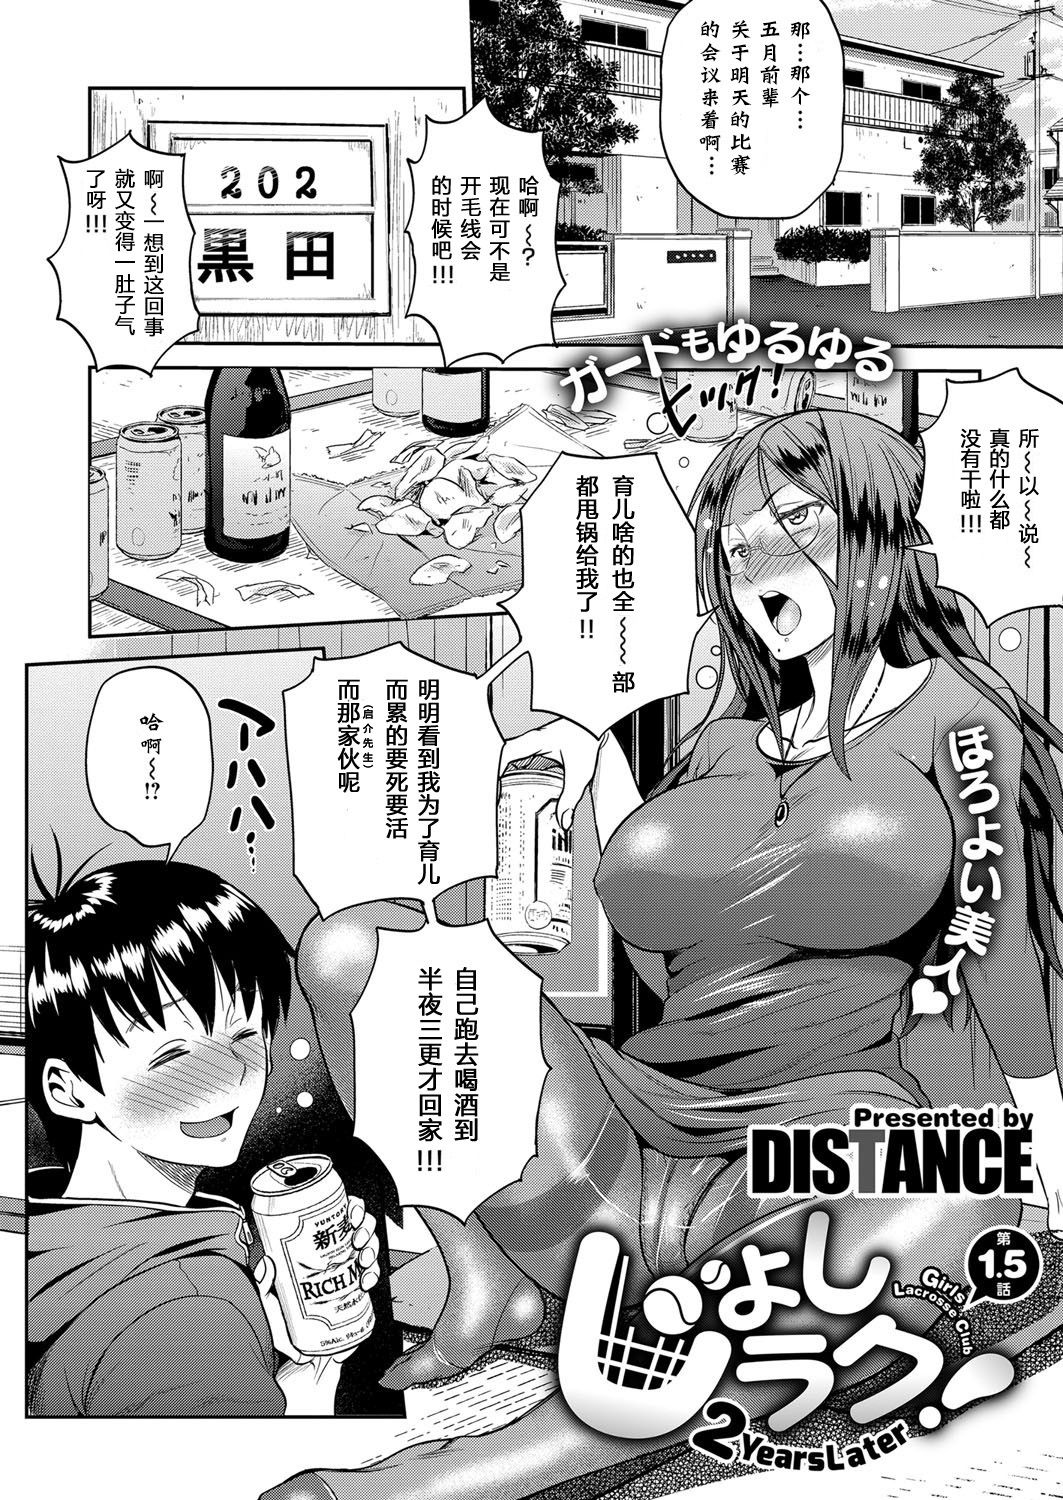 [DISTANCE] Joshi Lacu! - Girls Lacrosse Club ~2 Years Later~ Ch. 1.5 (COMIC ExE 06) [Chinese] [鬼畜王汉化组] [Digital] [DISTANCE] じょしラク！～2Years Later～ 第1.5話 (コミック エグゼ 06) [中国翻訳] [DL版]